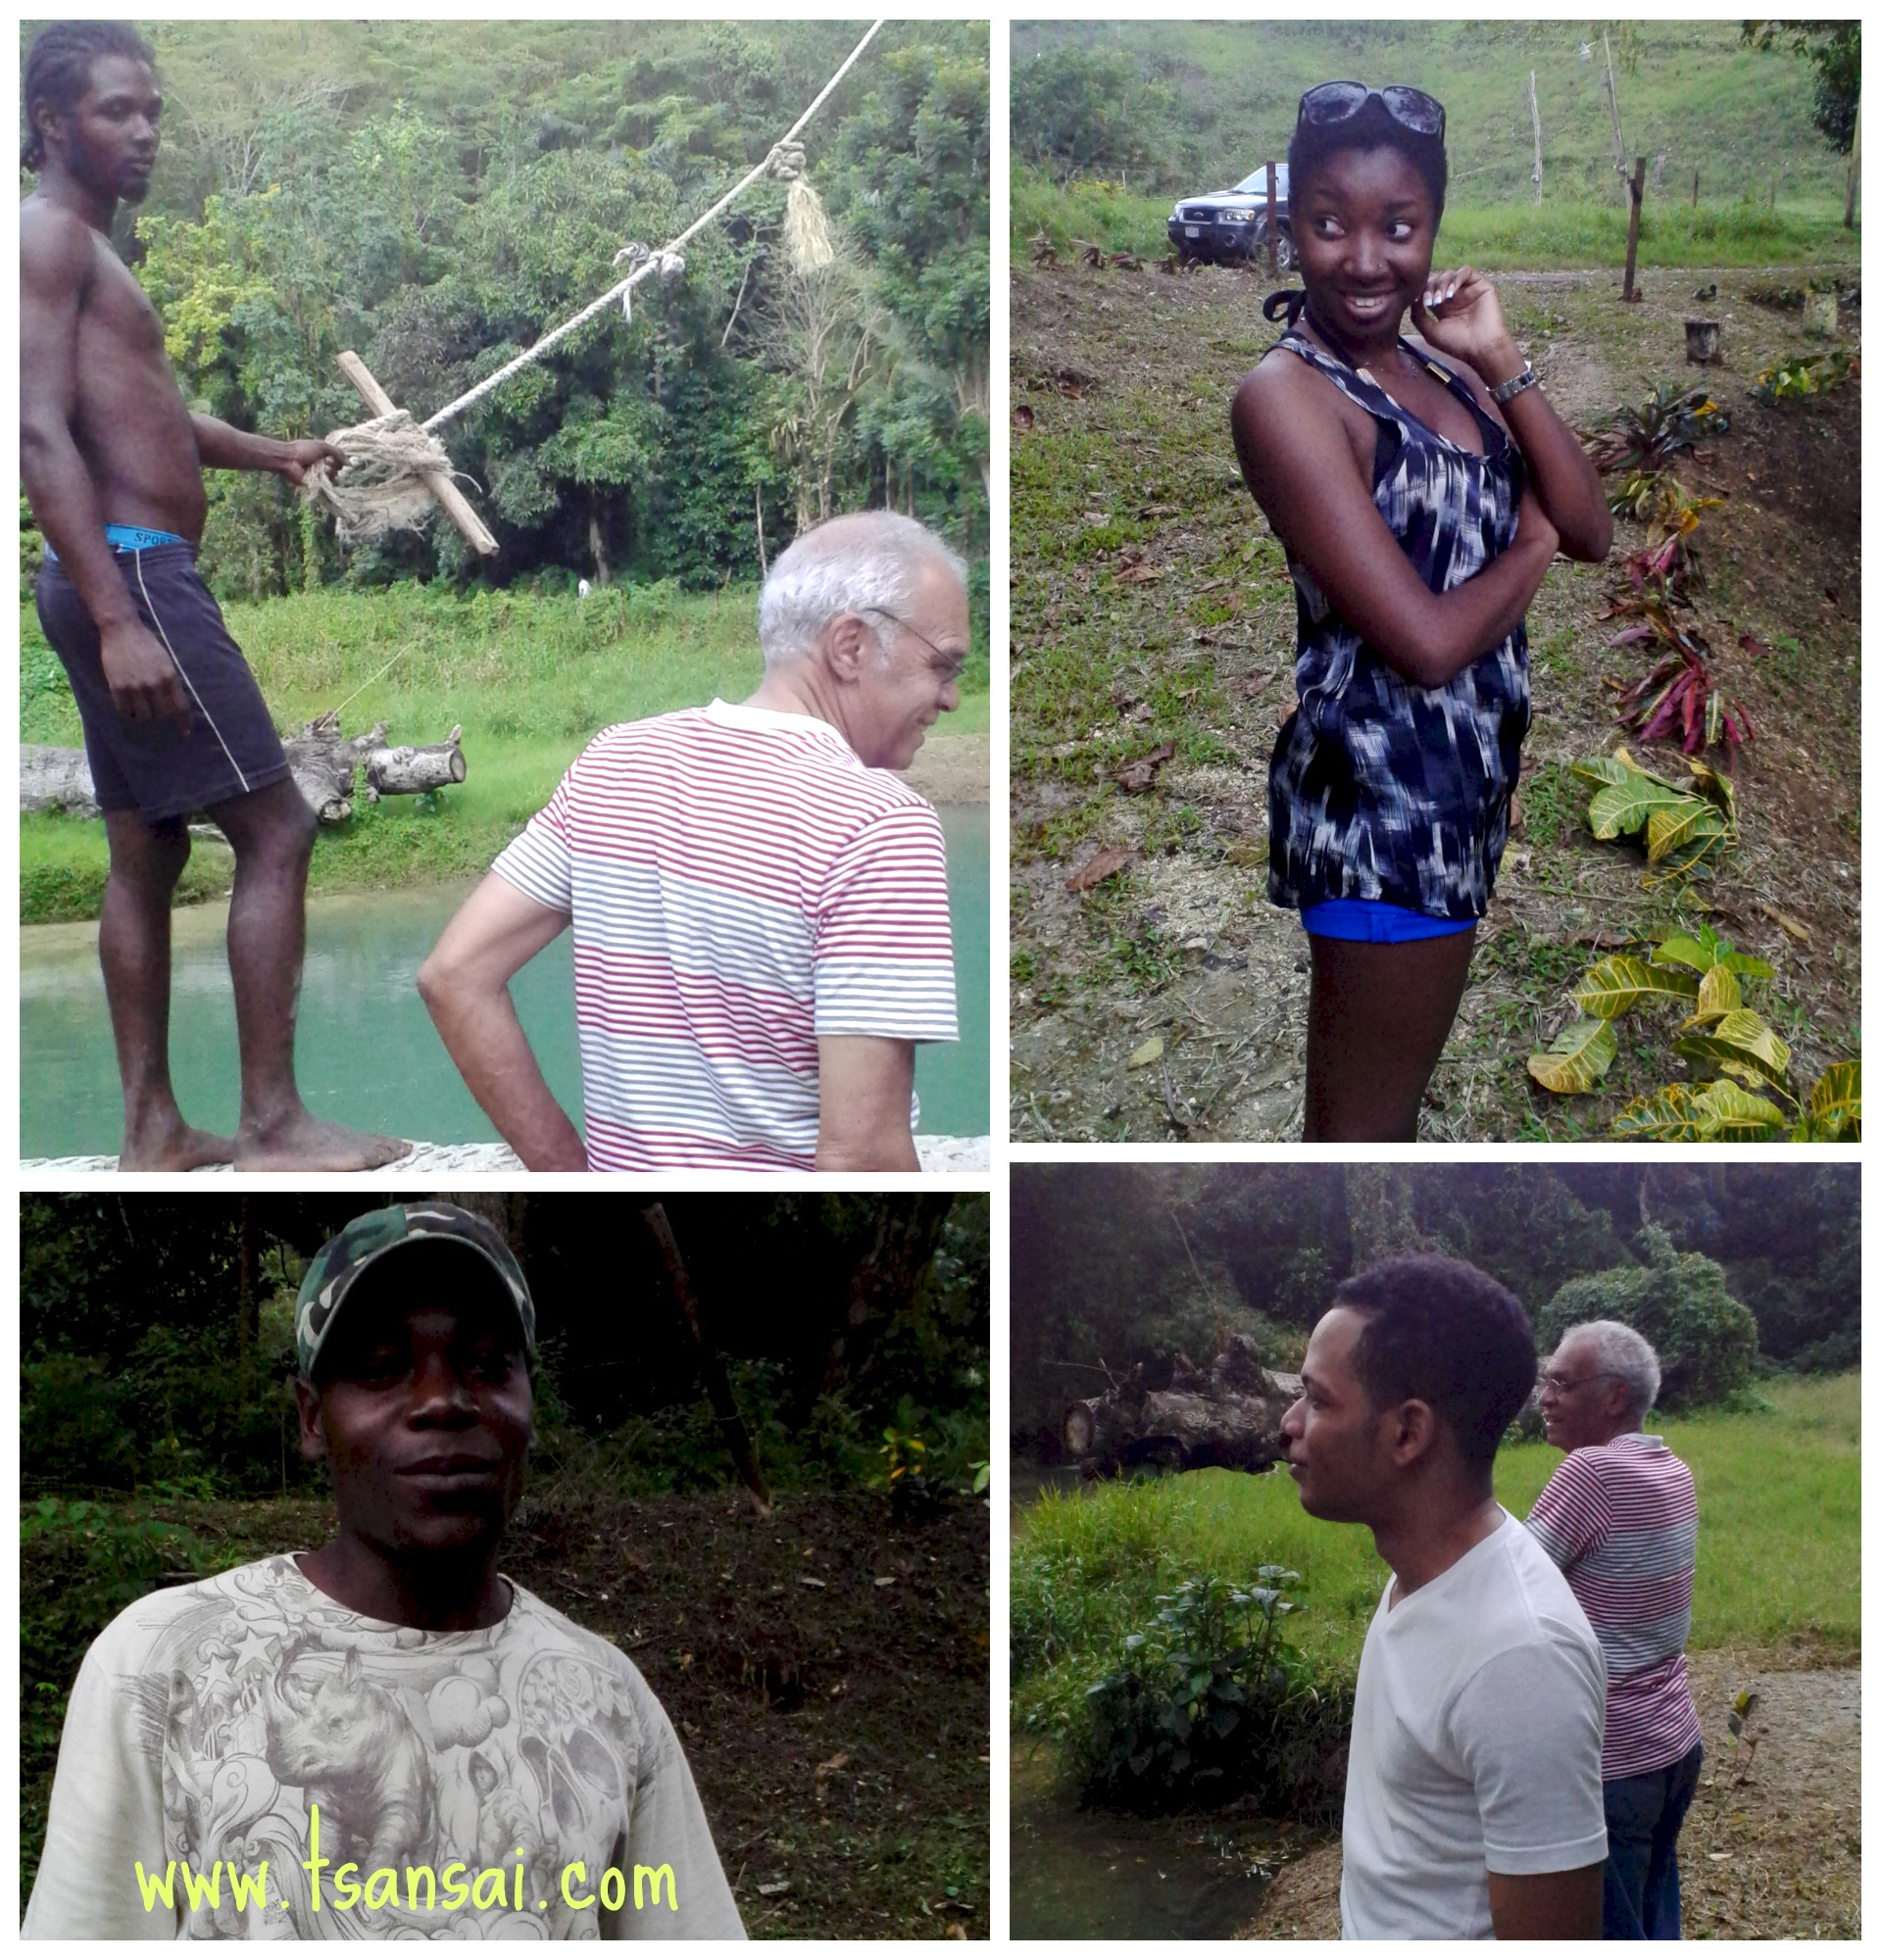 Scenes from Labyrinth/White River Valley. From top left (clockwise): Shango (our guide while swinging), Uncle George, Jody & Shomari ---travelling partners--- and Munair, tour guide.